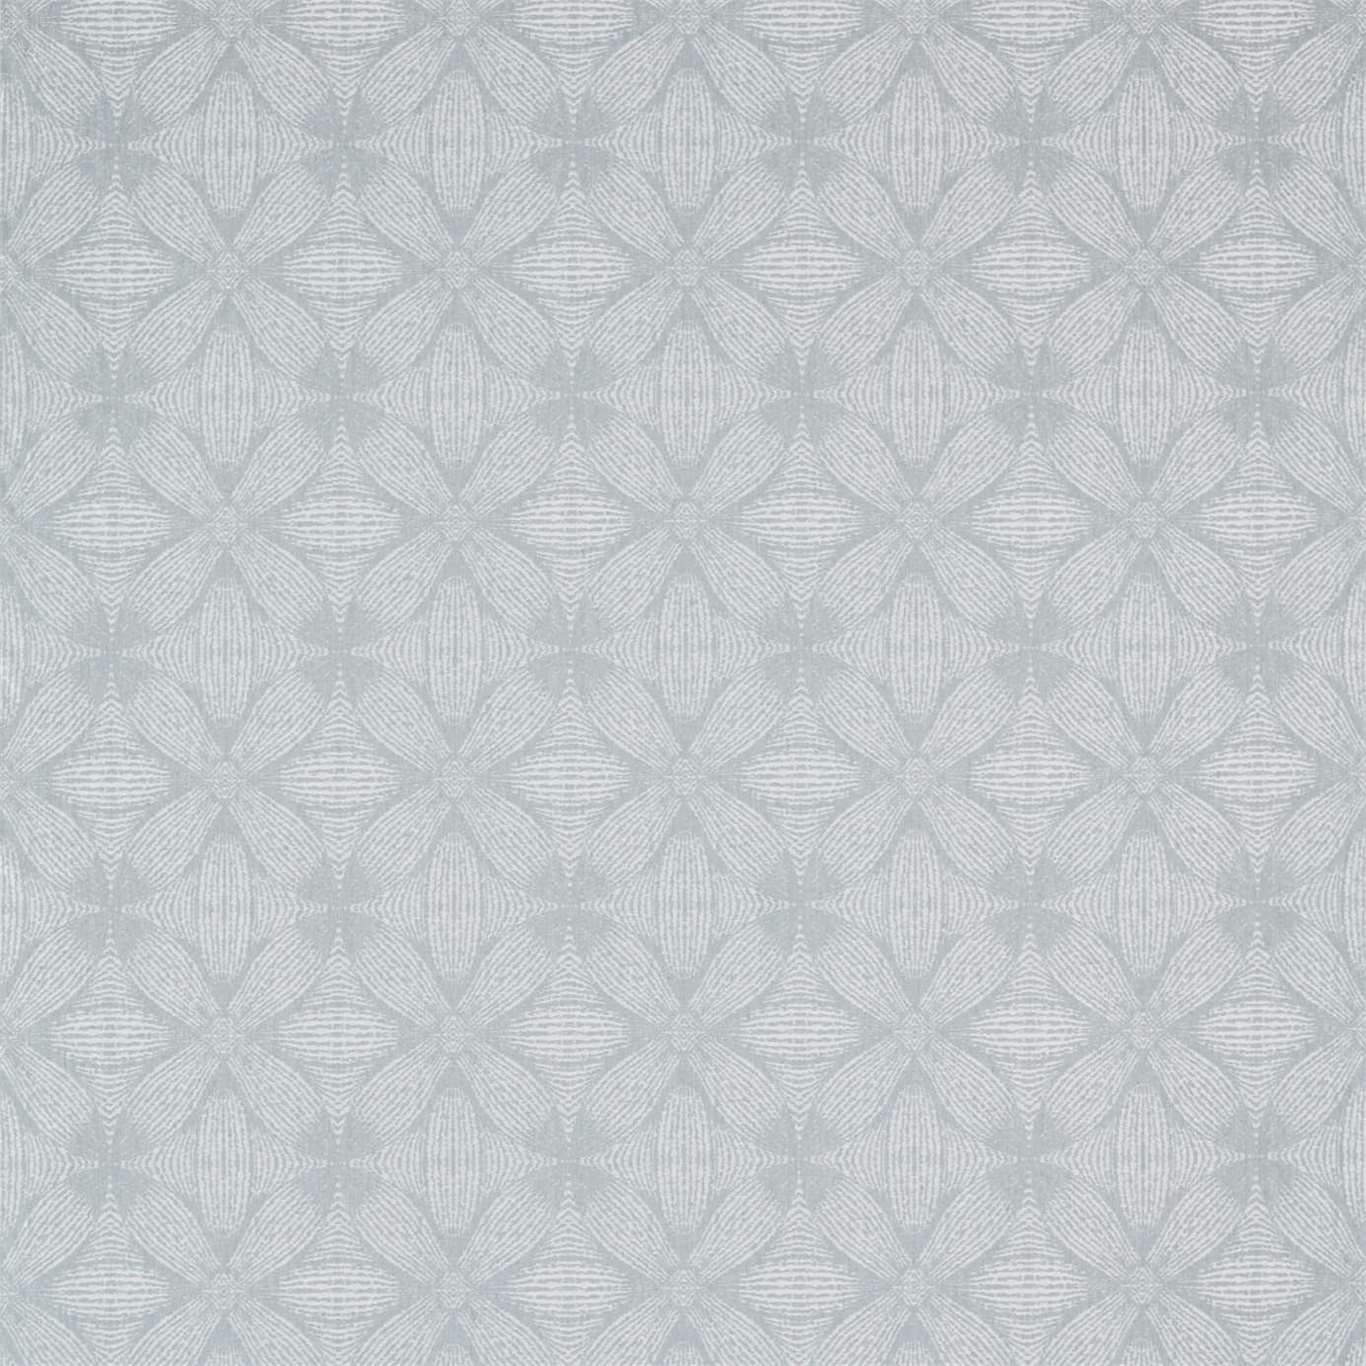 Sycamore Weave Mist Fabric by SAN